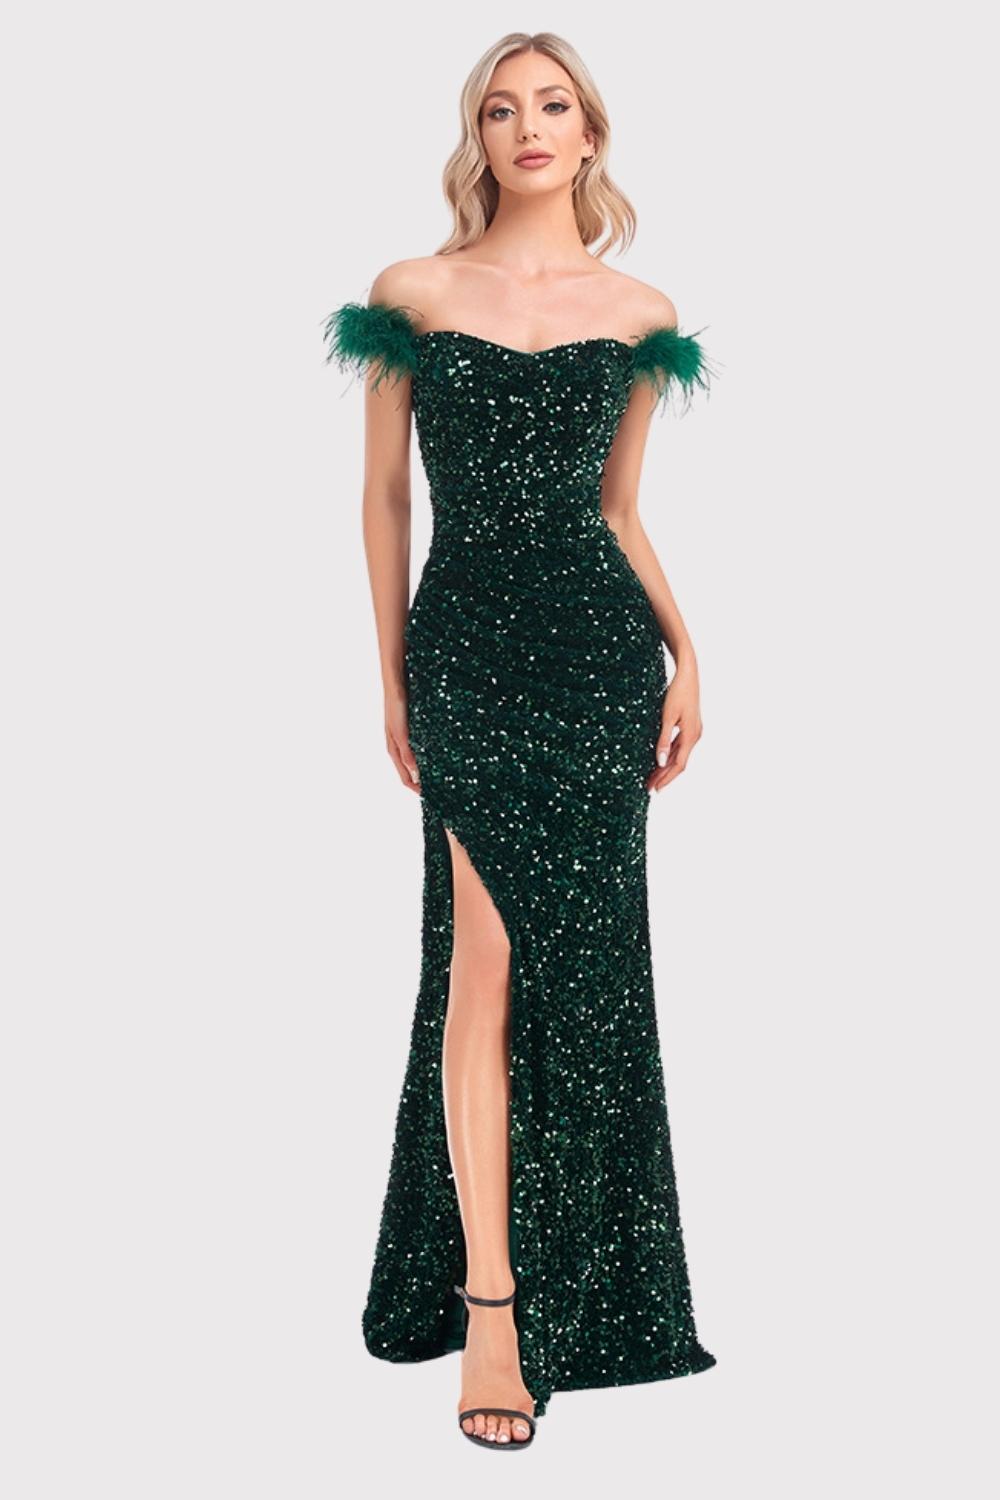 Mermaid Off The Shoulder Sequins Dark Green Prom Dress with Feathers